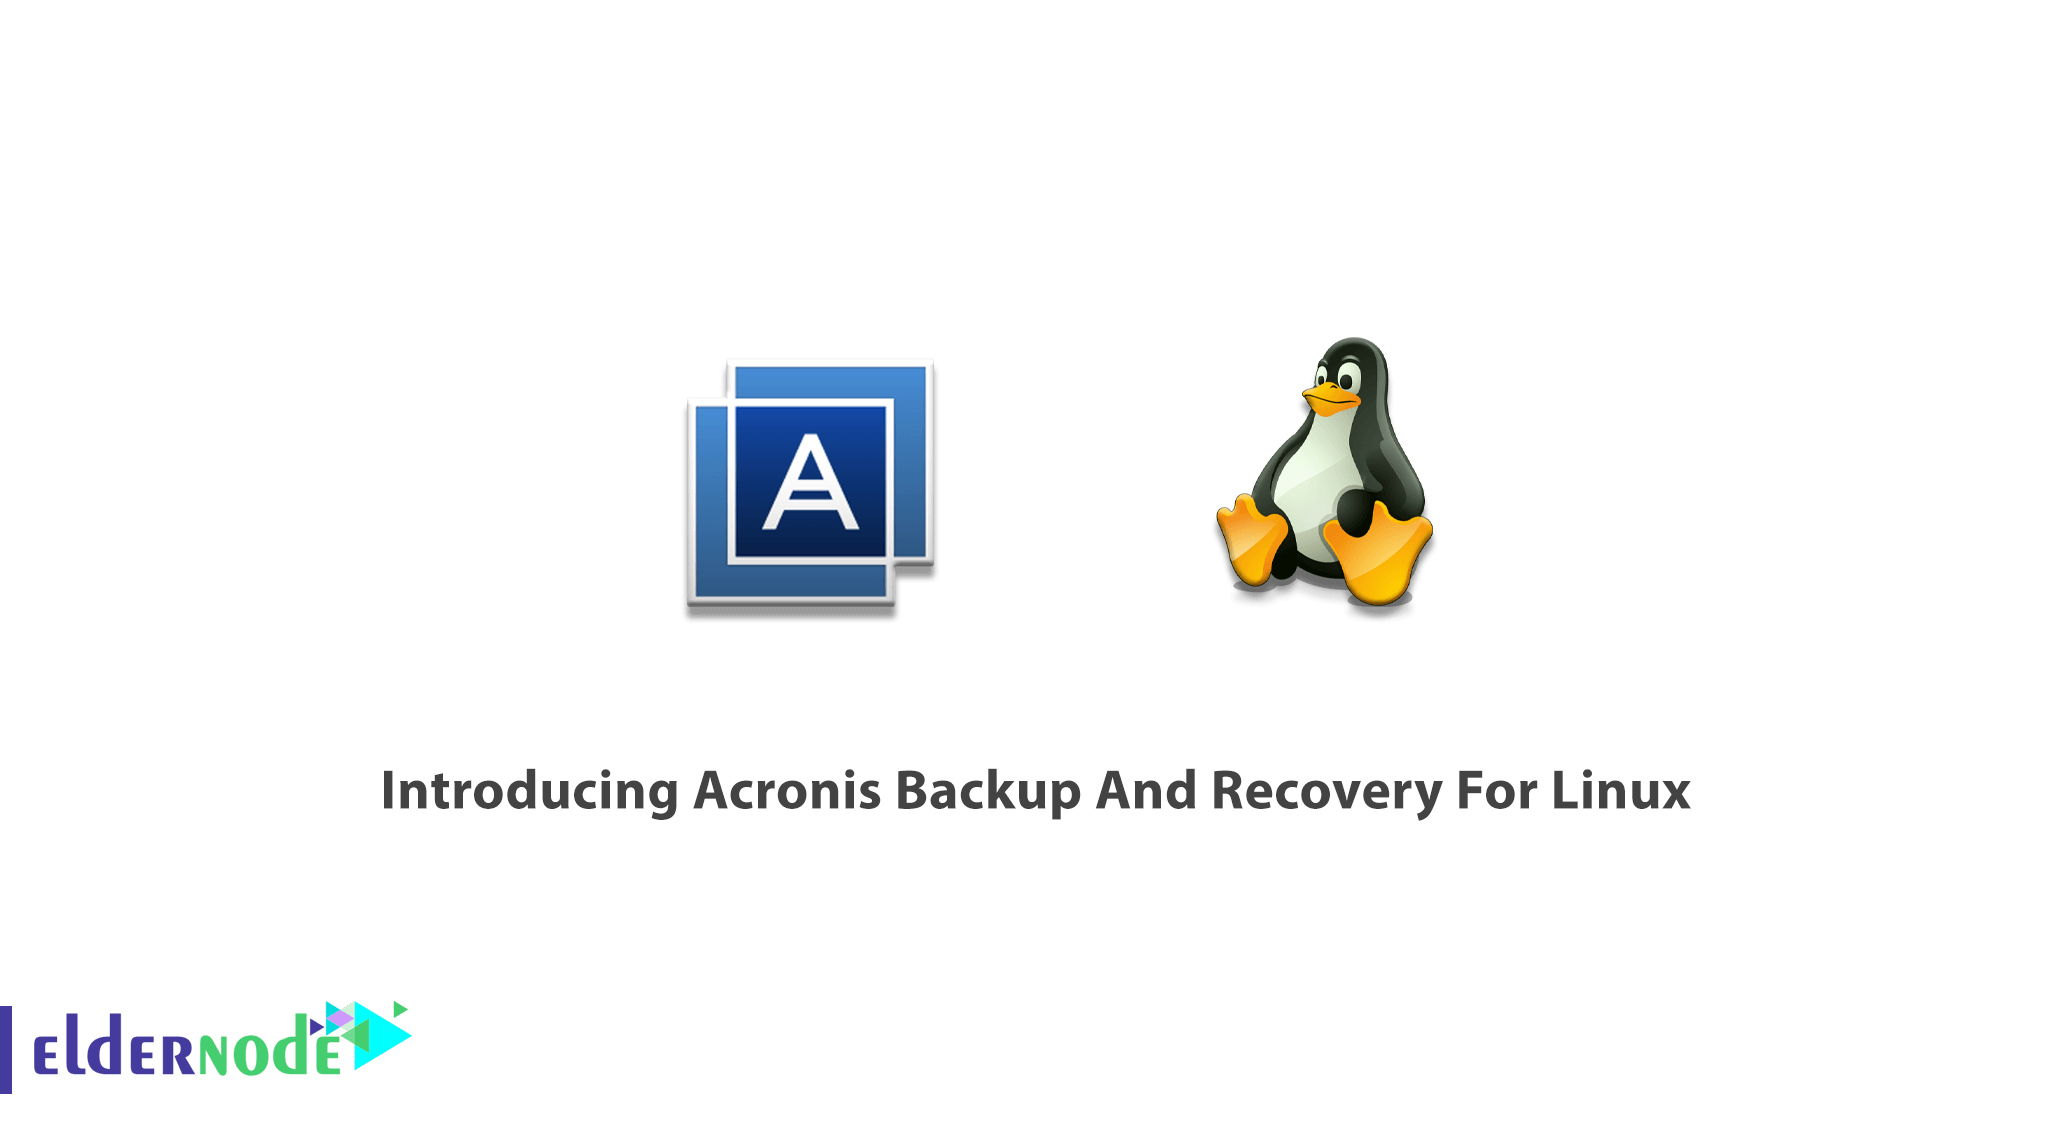 Introducing Acronis Backup And Recovery For Linux